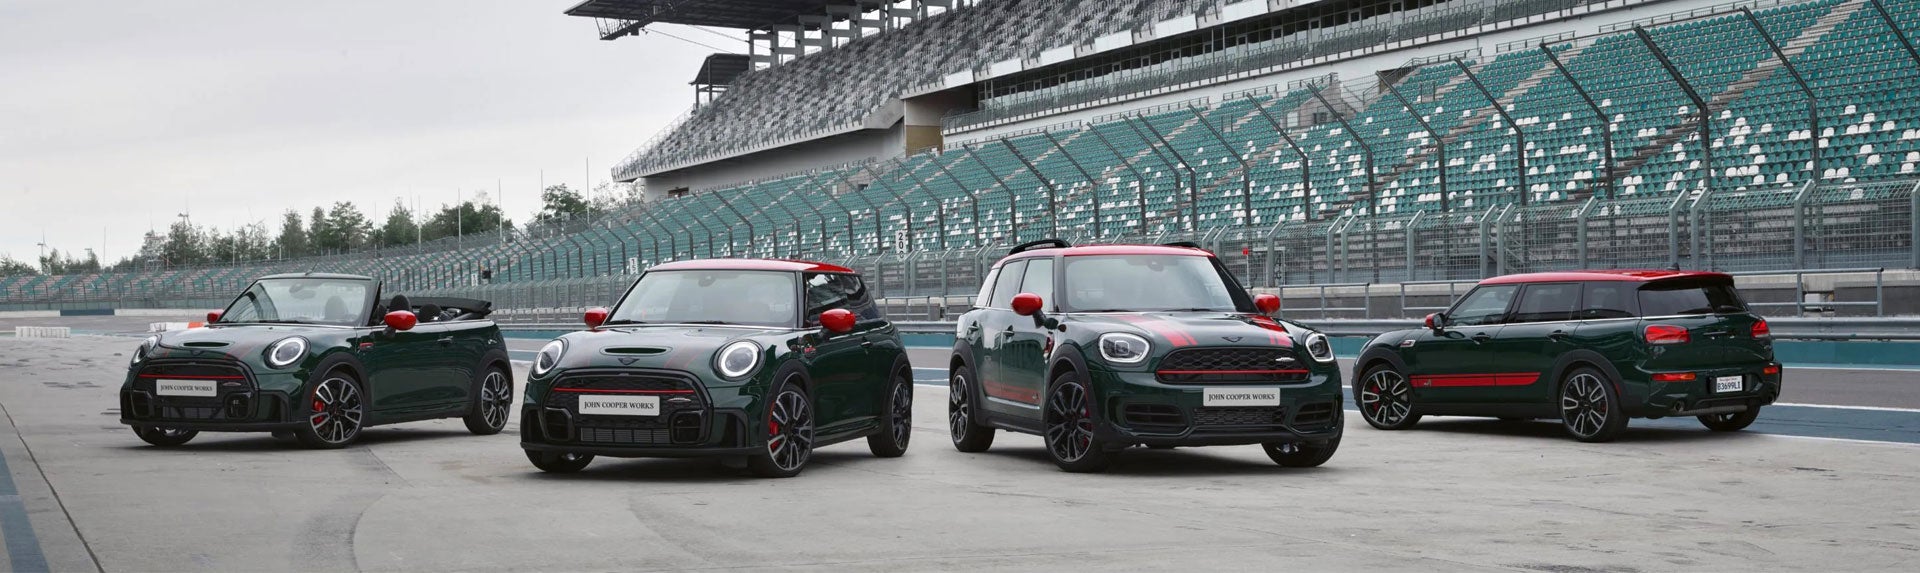 Family of four MINI John Cooper Works models parked on a race track. | Ferman MINI of Tampa Bay in Palm Harbor FL